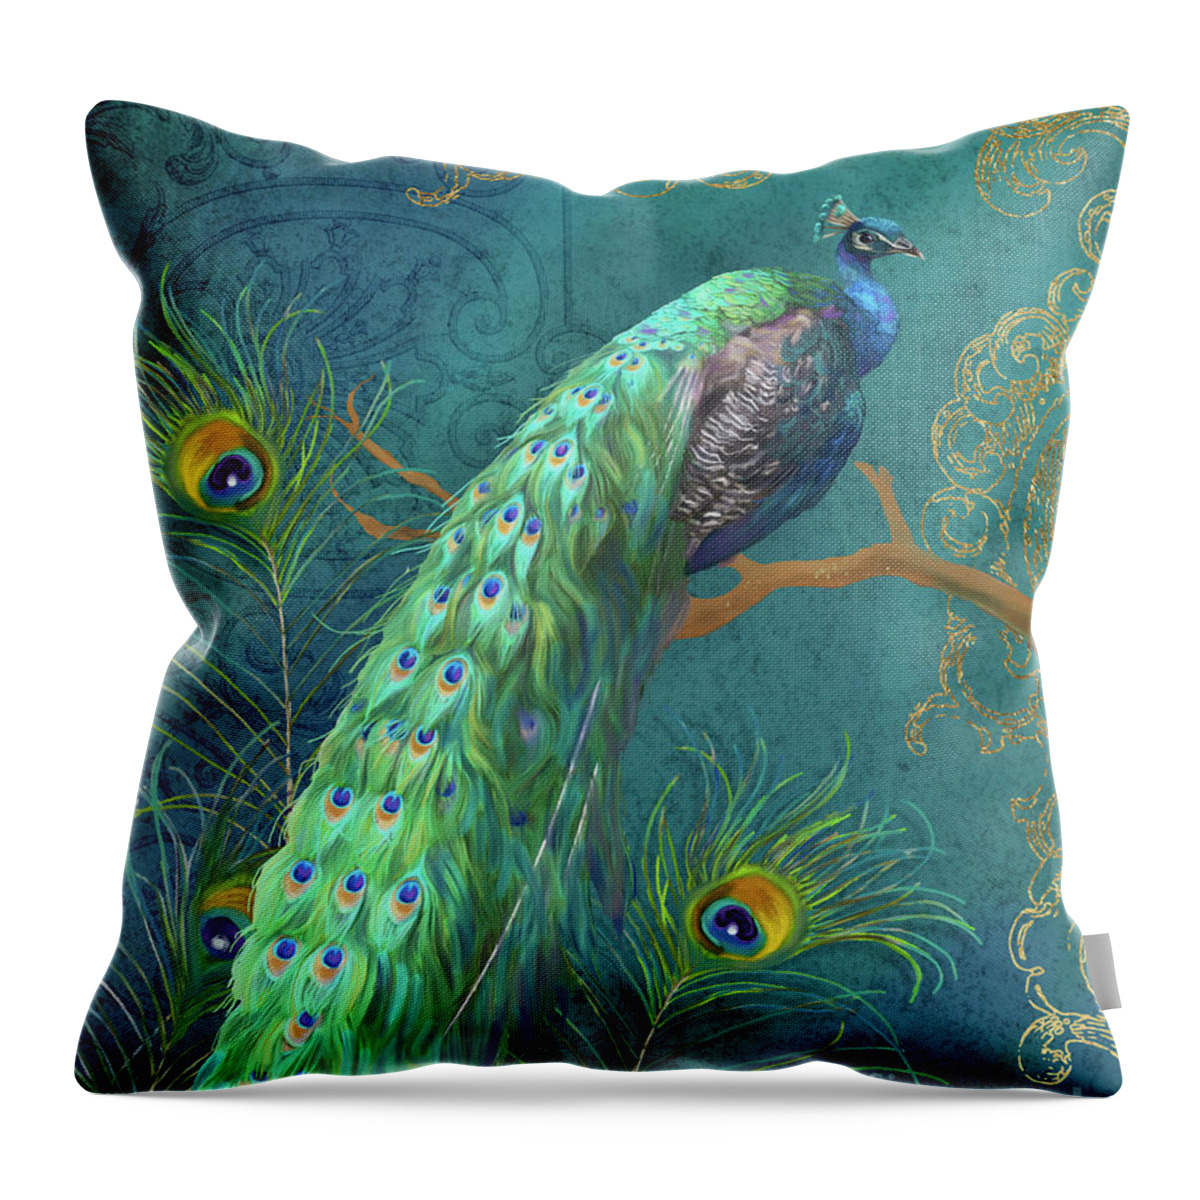 Peacock Throw Pillow featuring the painting Regal Peacock 3 Midnight by Audrey Jeanne Roberts